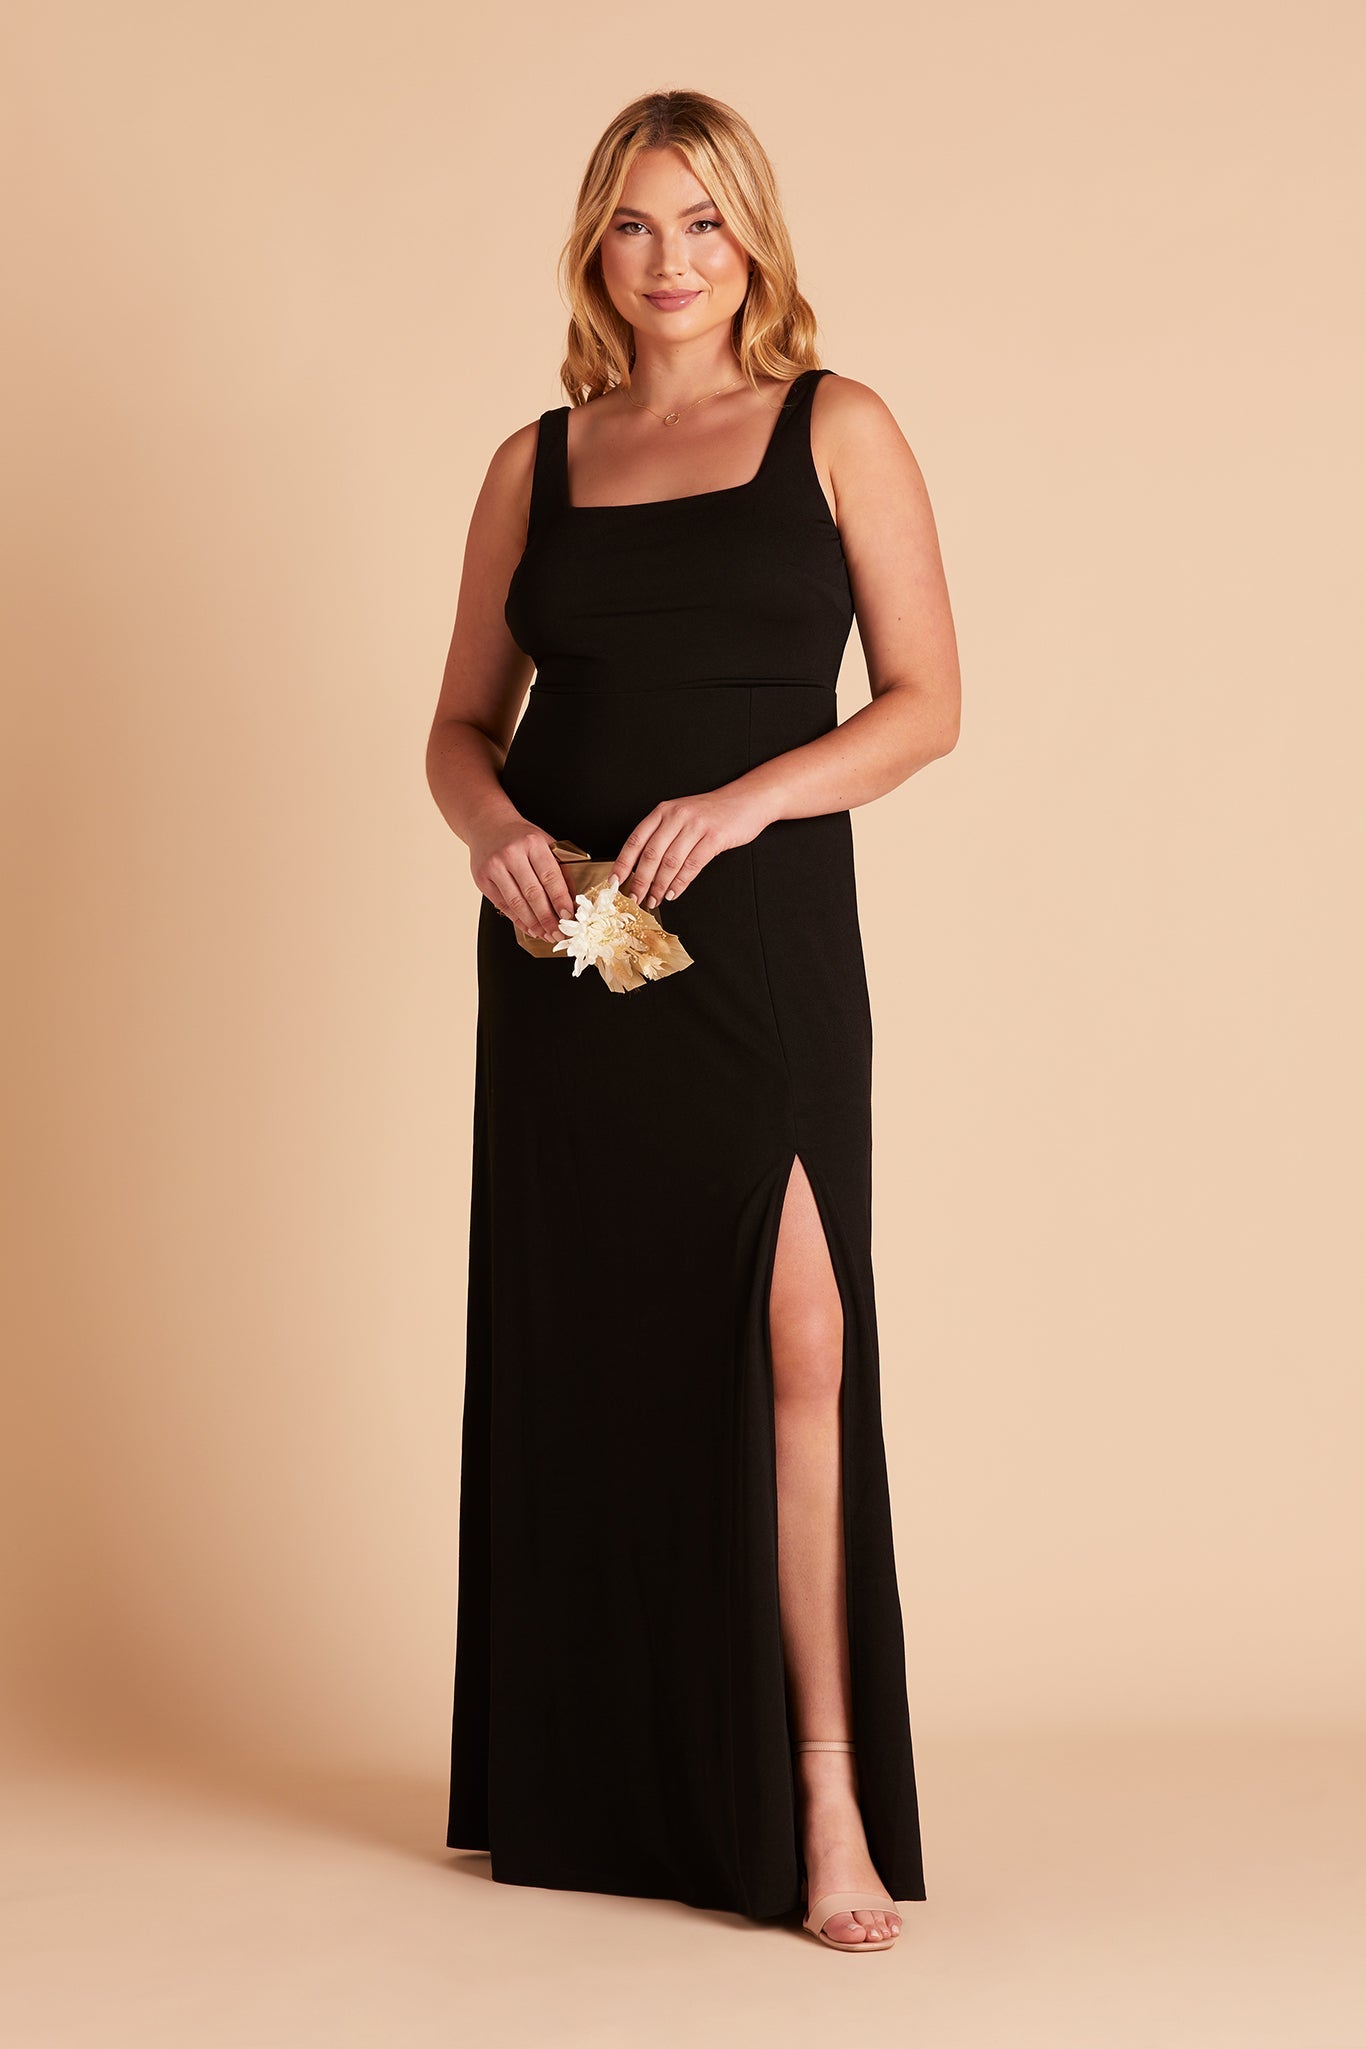 Alex convertible plus size bridesmaid dress with slit in black crepe by Birdy Grey, front view